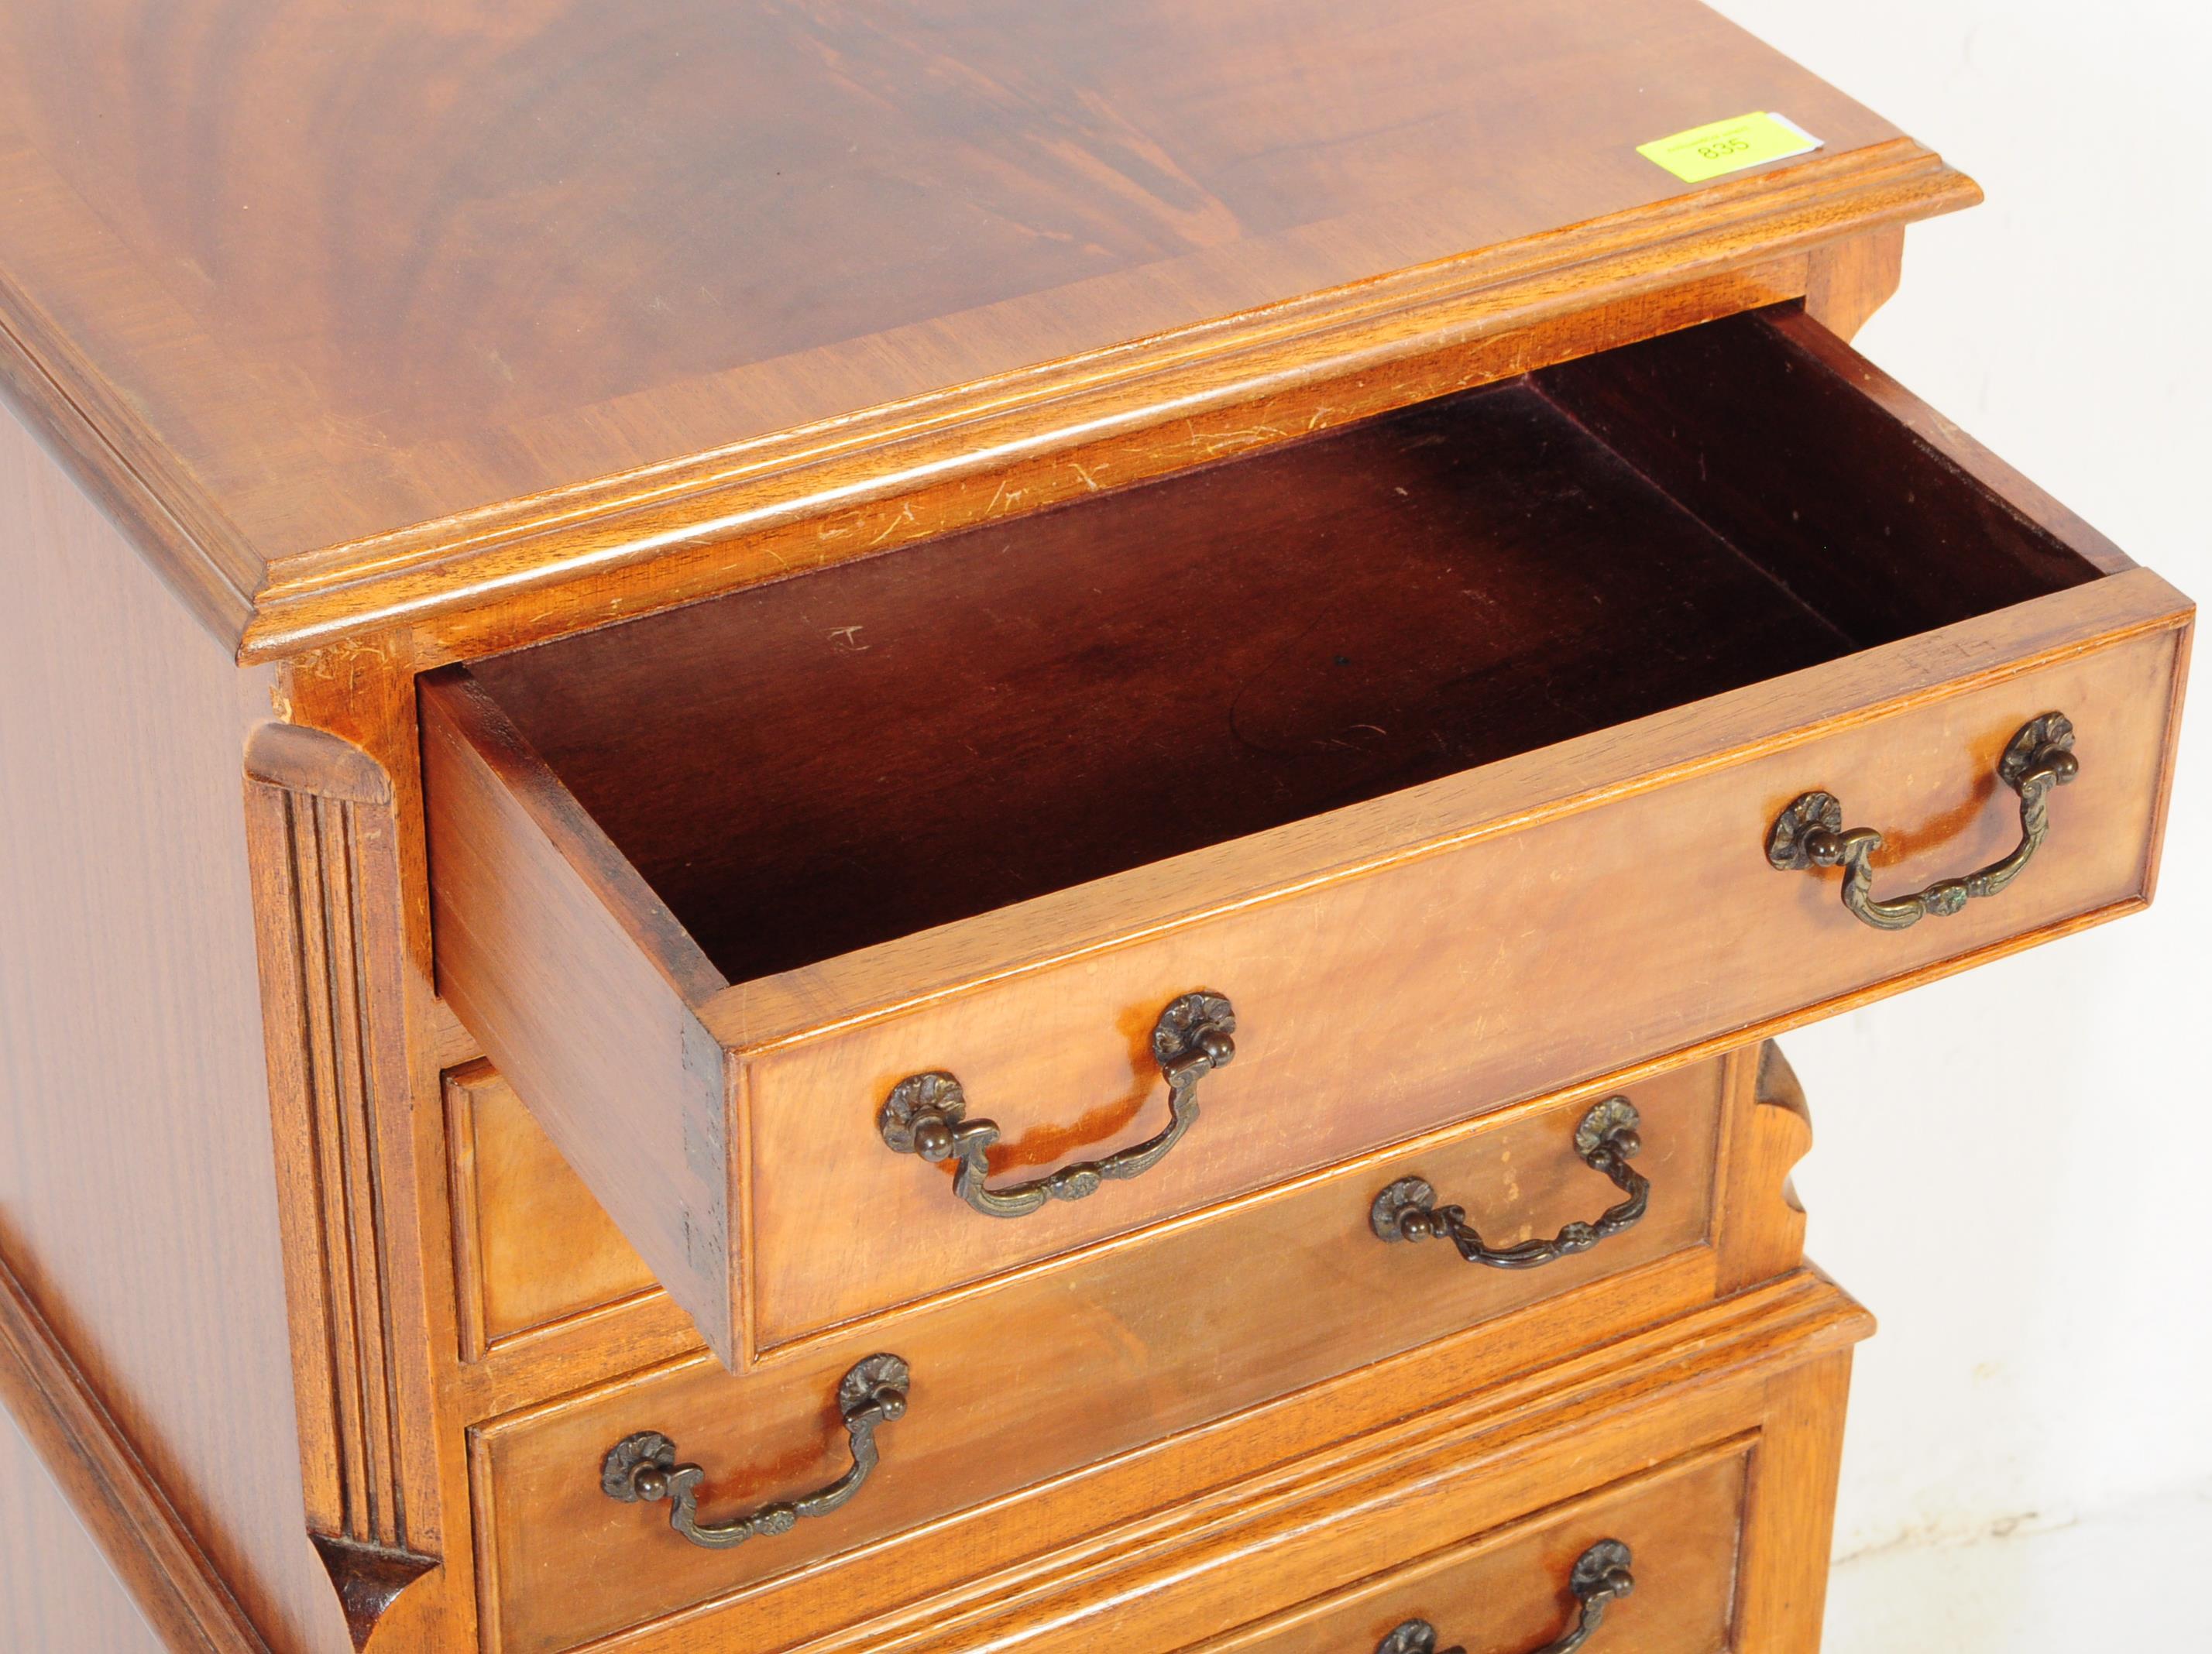 EARLY 20TH CENTURY QUEEN ANNE REVIVAL CHEST ON STAND - Image 3 of 5